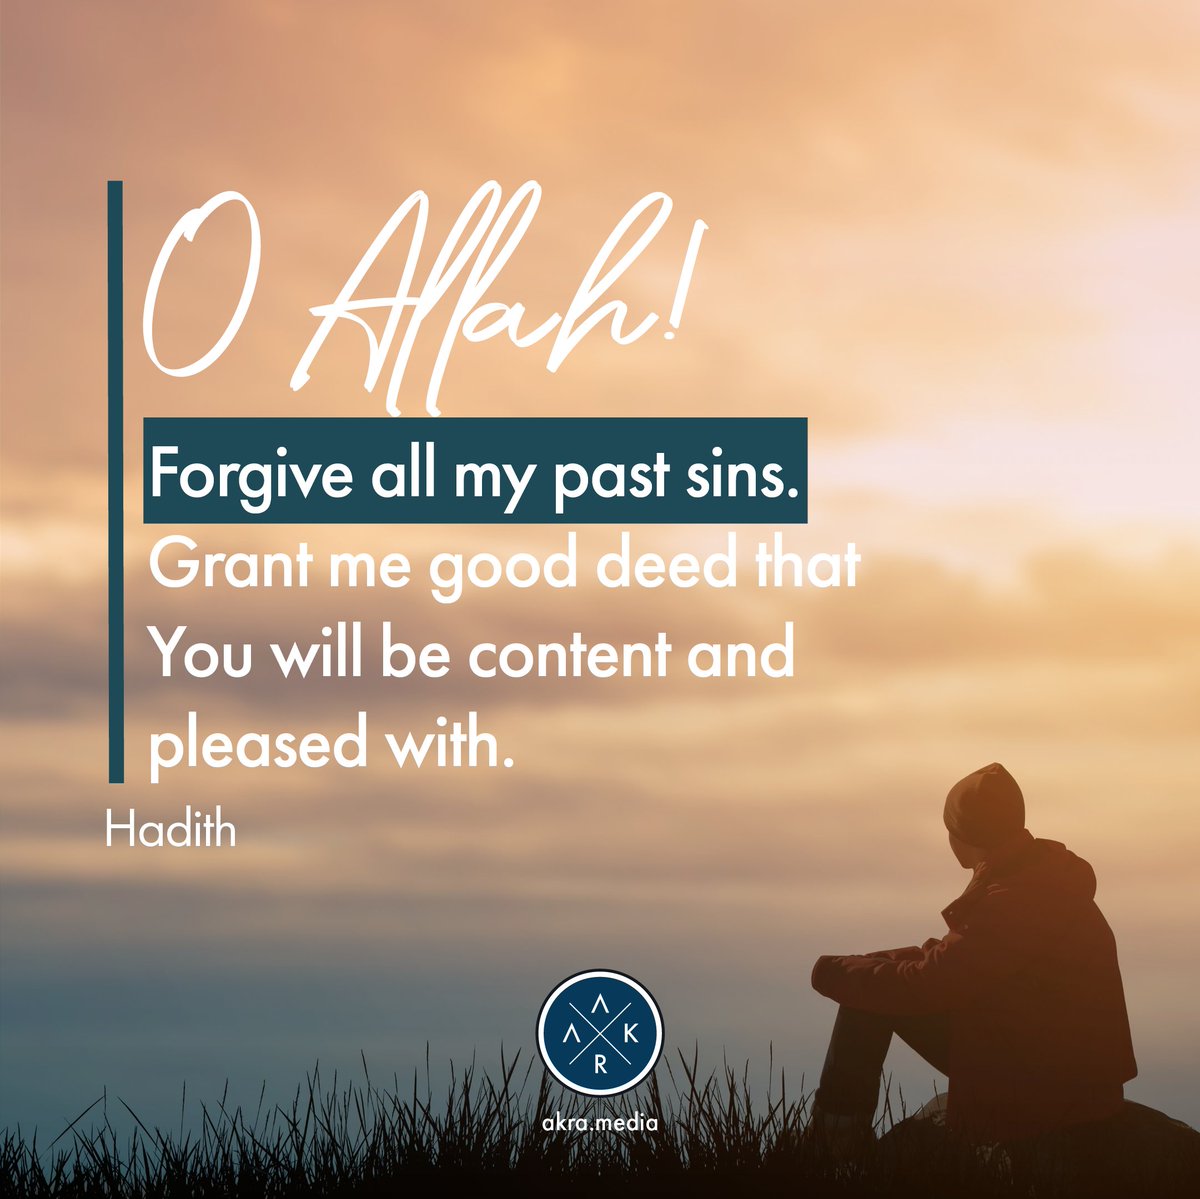 O Allah!

Forgive all my past sins. Grant me good deeds that You will be content and pleased with.

Hadith

#hadith #ProphetMuhammadﷺ  #gooddeeds #forgivenessquotes #startinganew #virtue #quoteoftheday